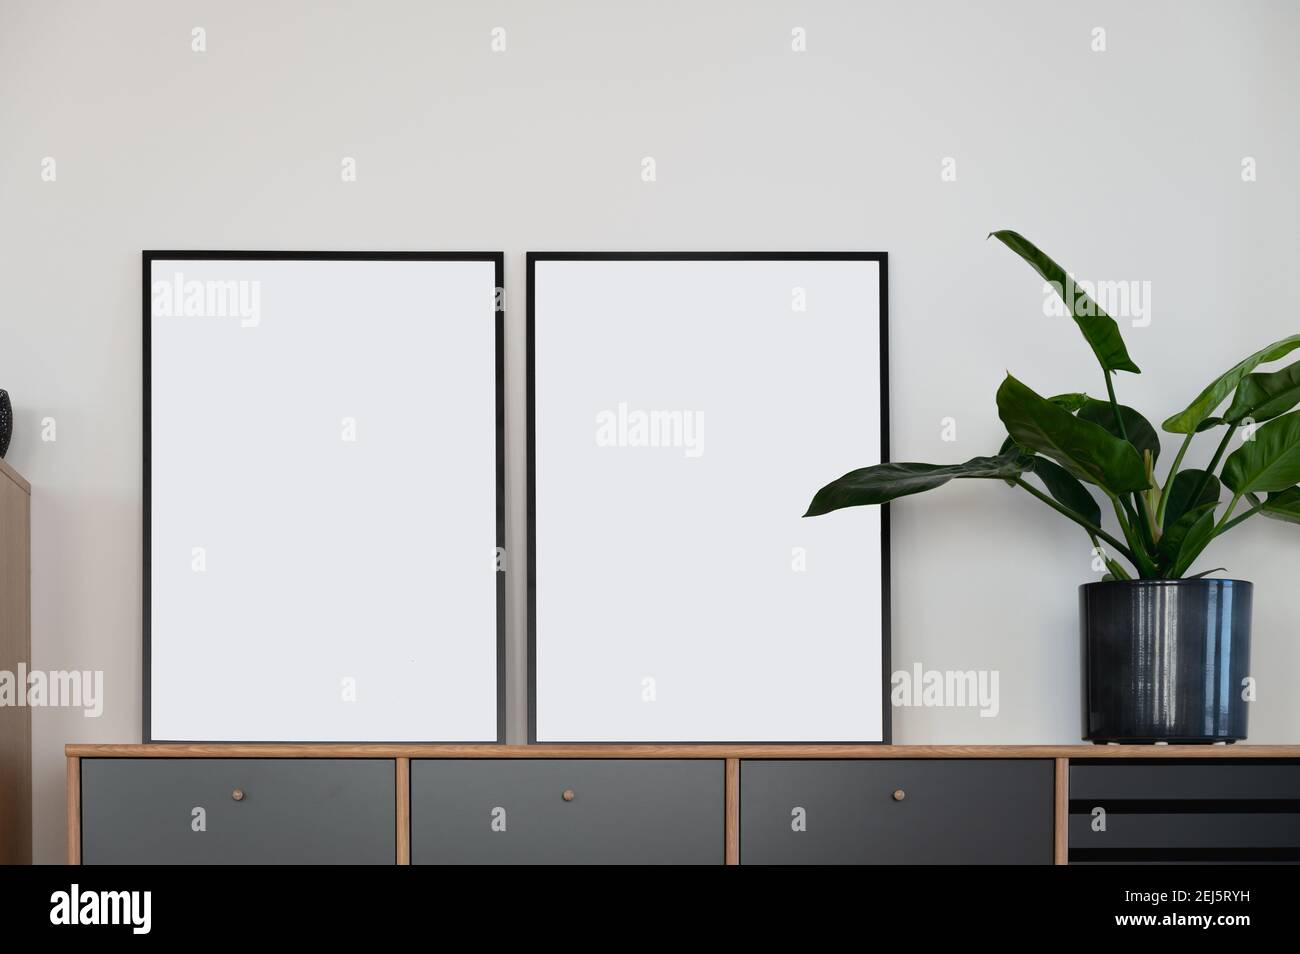 Two vertical black mockup frames on wooden design sideboard leaning against white wall next to green plant in Scandi design Stock Photo